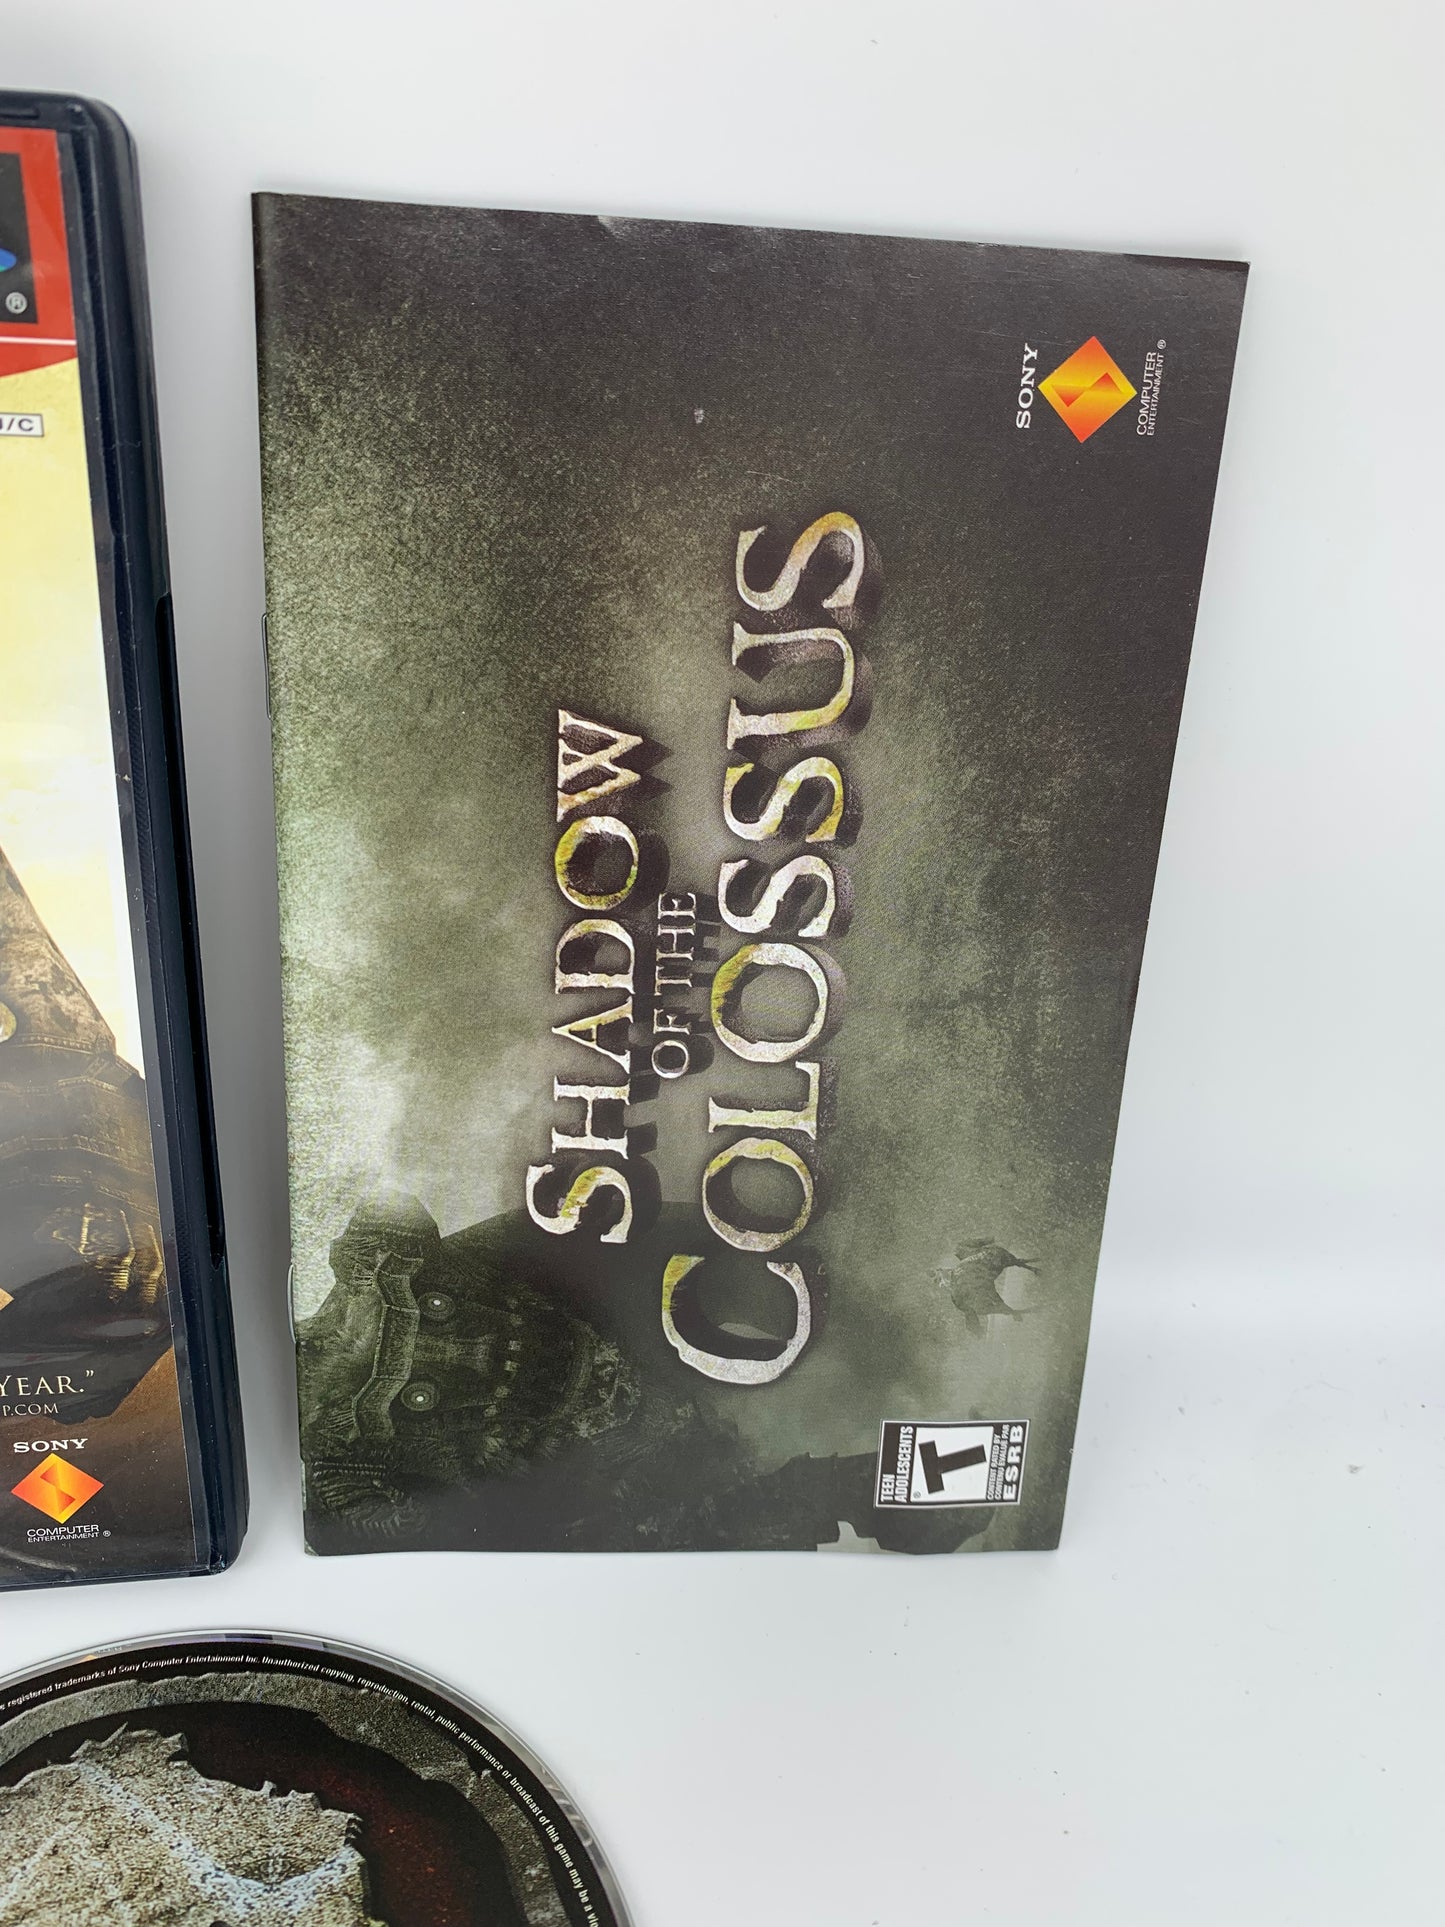 SONY PLAYSTATiON 2 [PS2] | SHADOW OF THE COLOSSUS | GREATEST HiTS